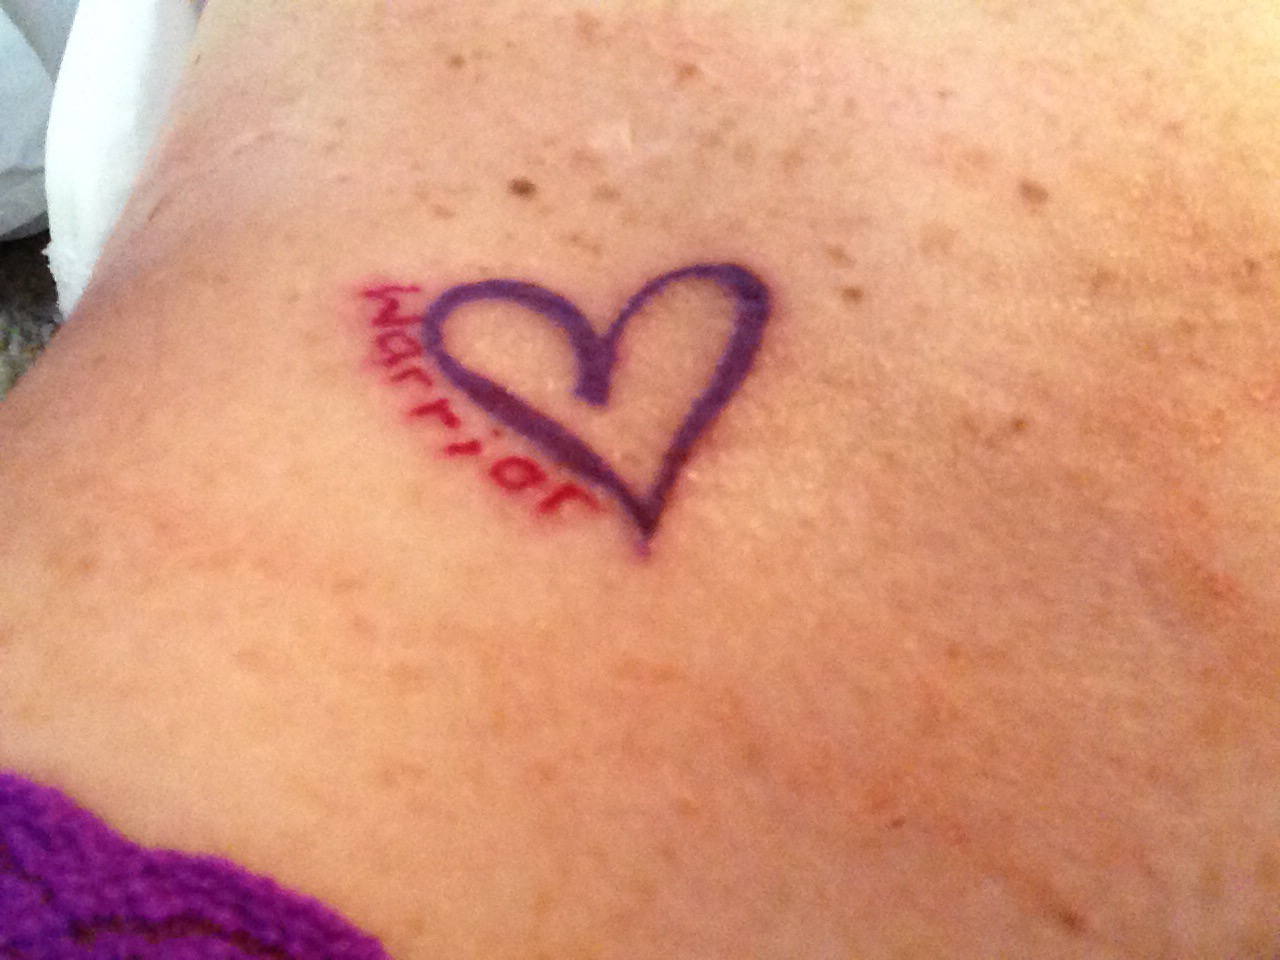 woman's stomach with purple heart tattoo that says warrior